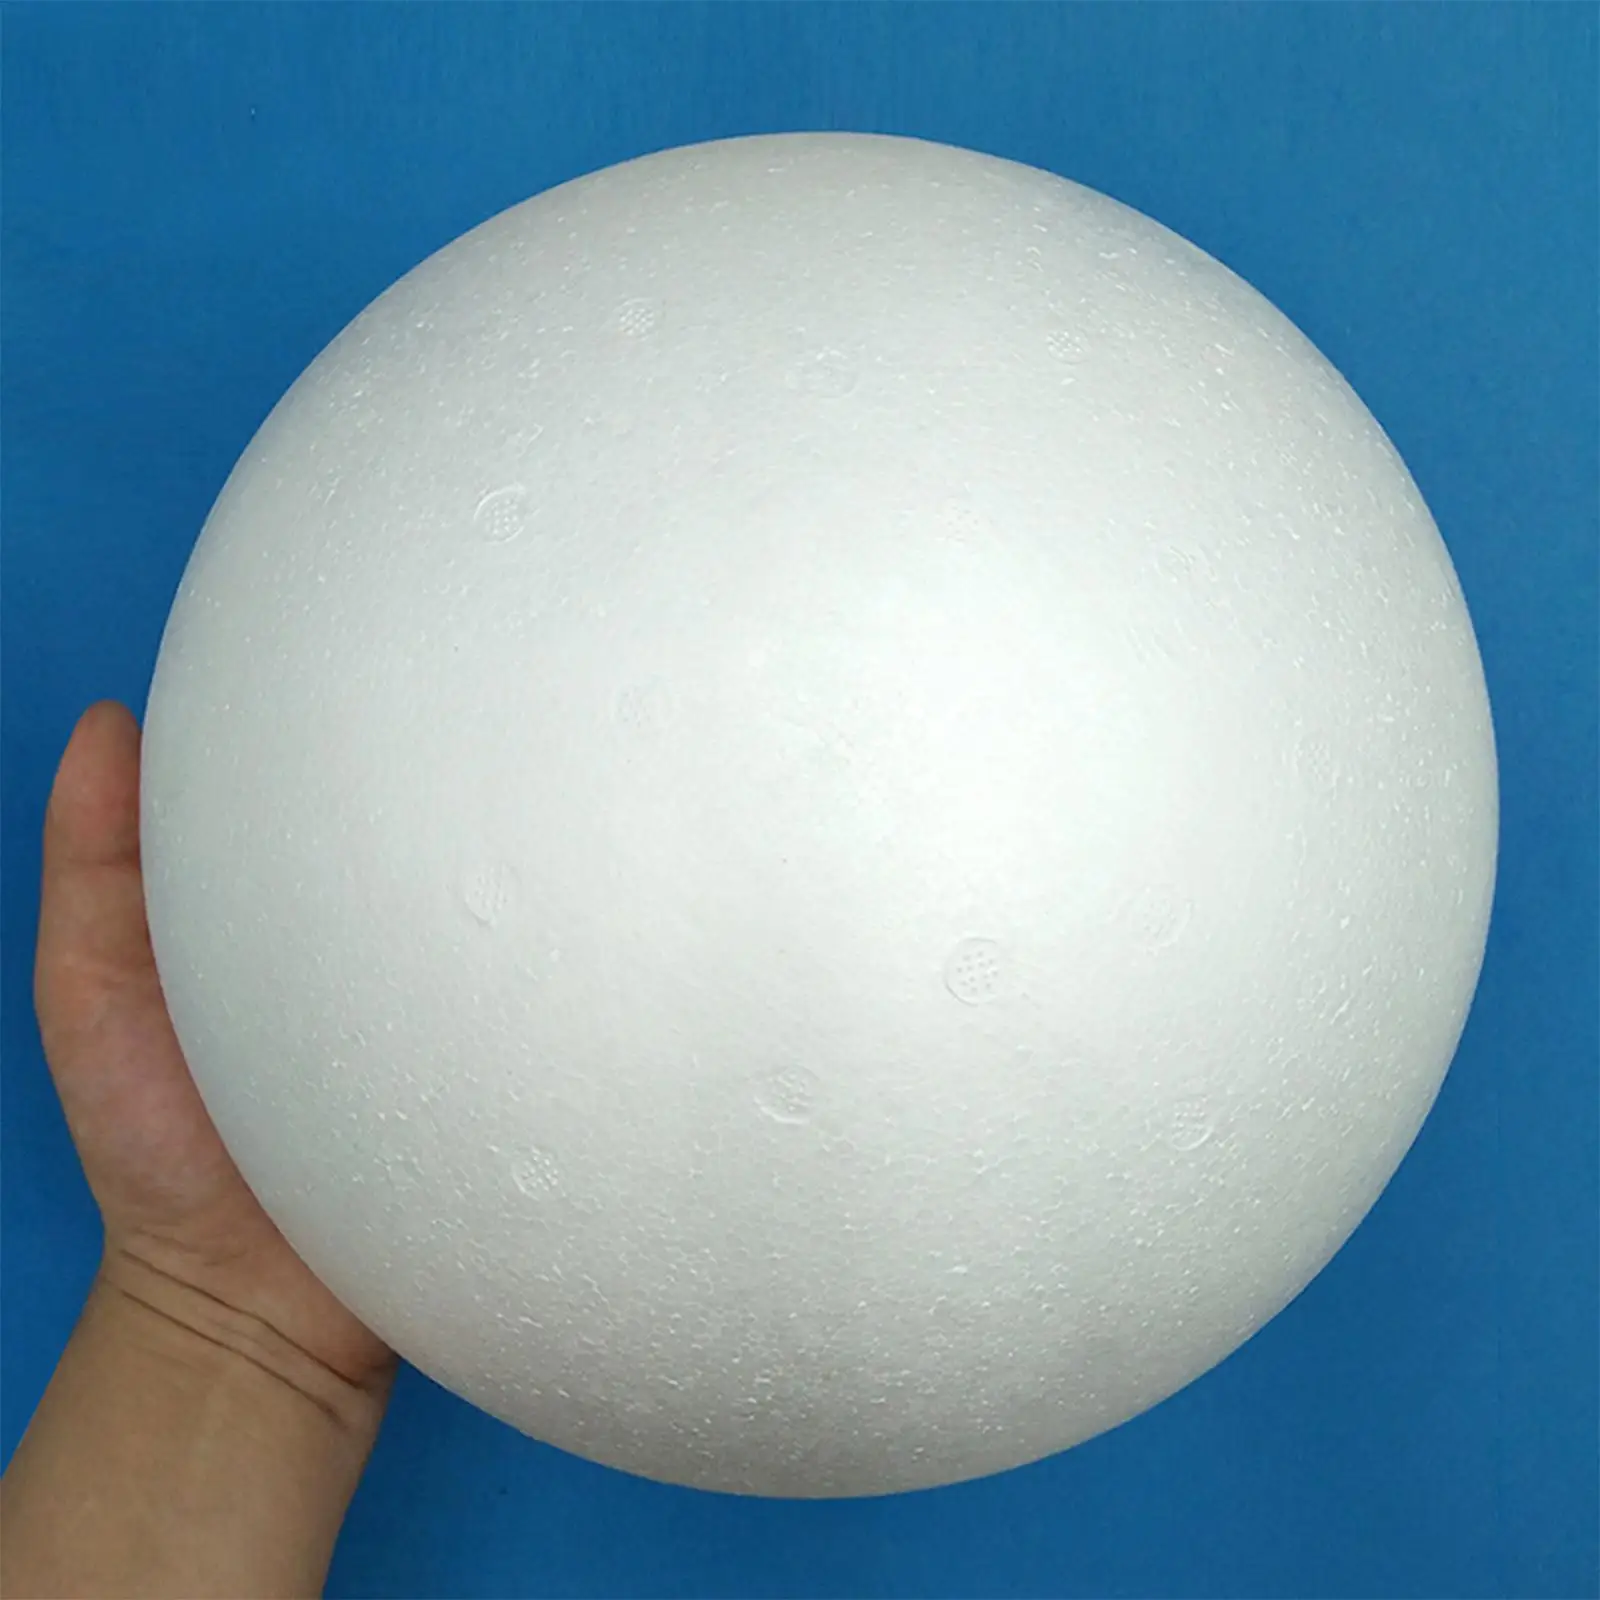 Foam Ball Half Round Mini Smooth School Supplies Toys 25cm for DIY Crafts Modeling Science Projects Decorations Birthday Wedding